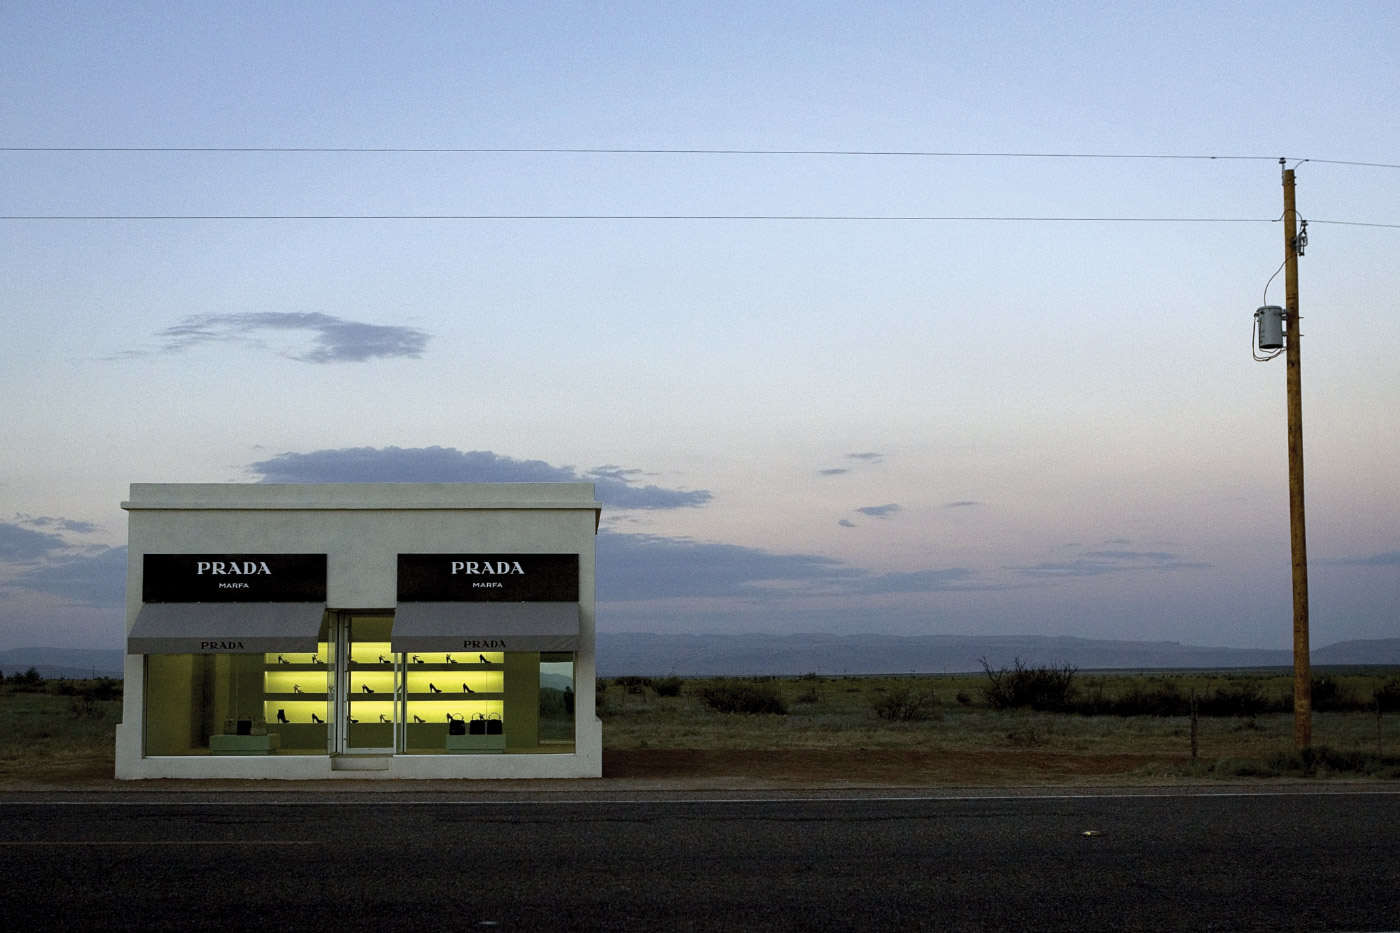 Prada Marfa's immigrant architecture is more relevant than ever